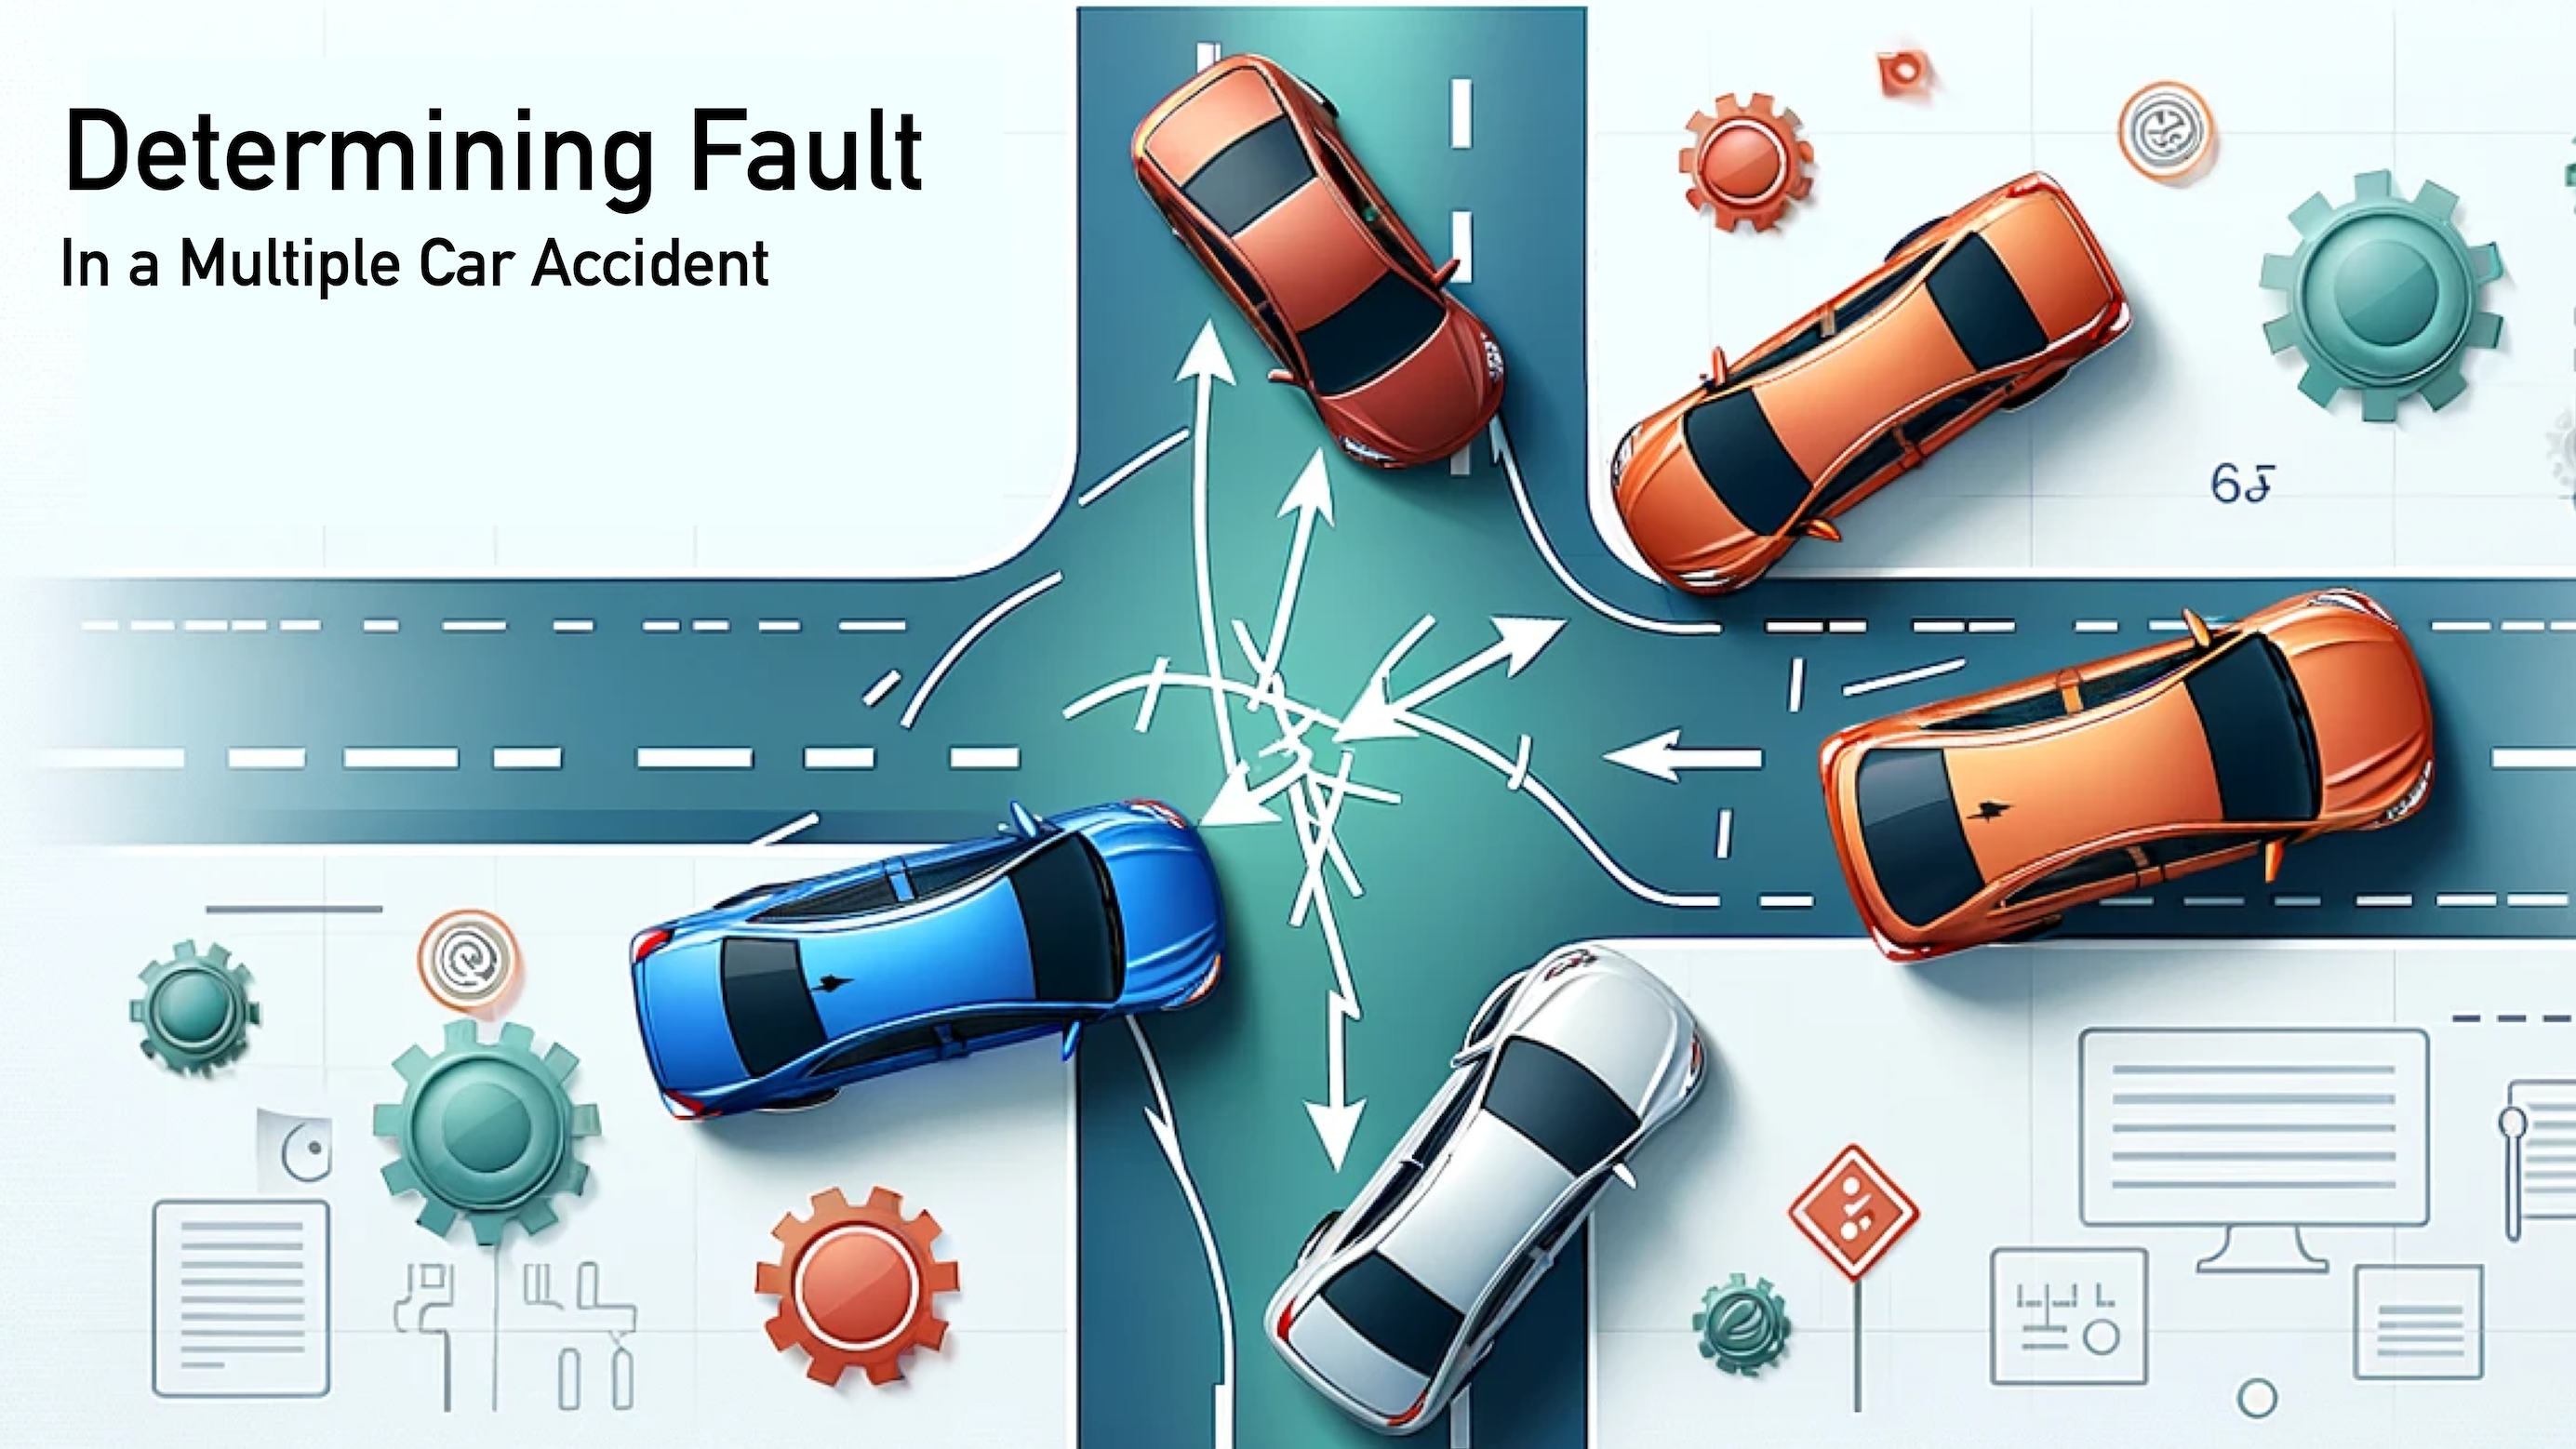 Diagram about how to determine fault in multiple vehicle car accident.